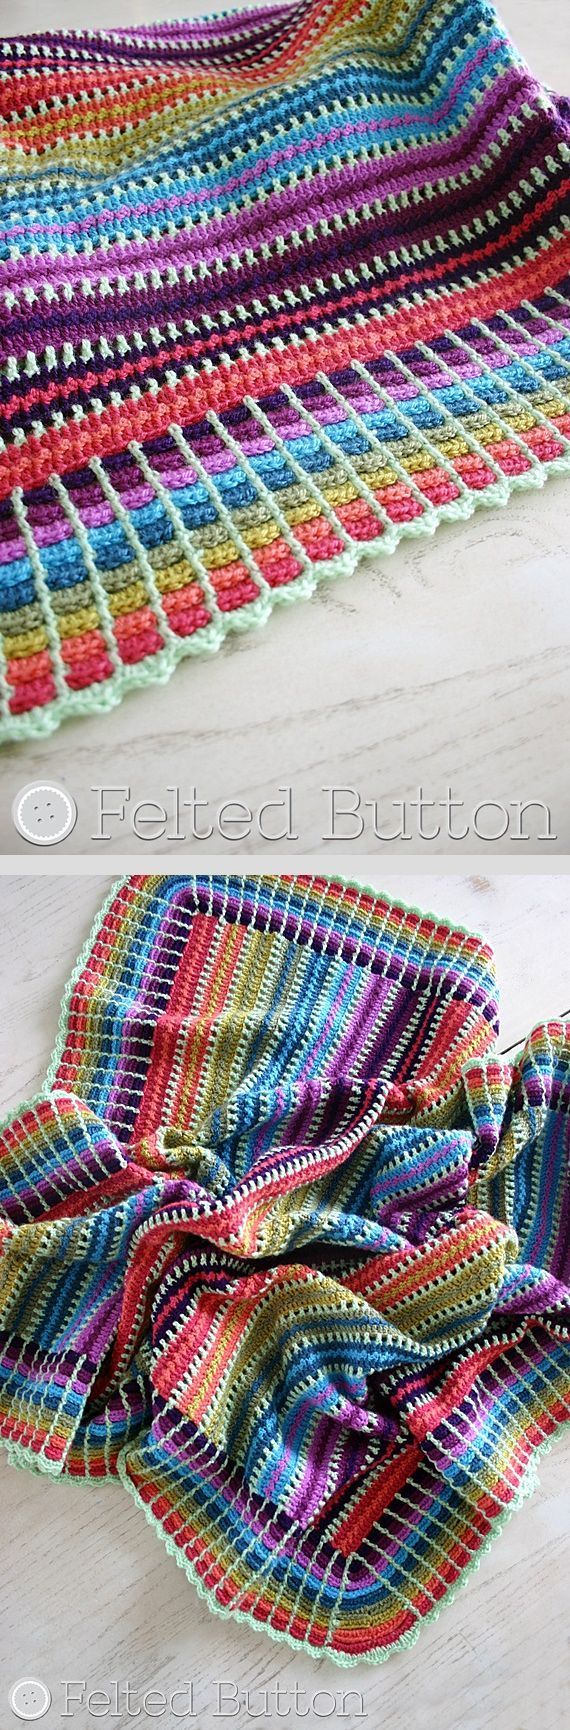 Skittles blanket, free pattern by Susan Carlson shown in photo using 10 colors…